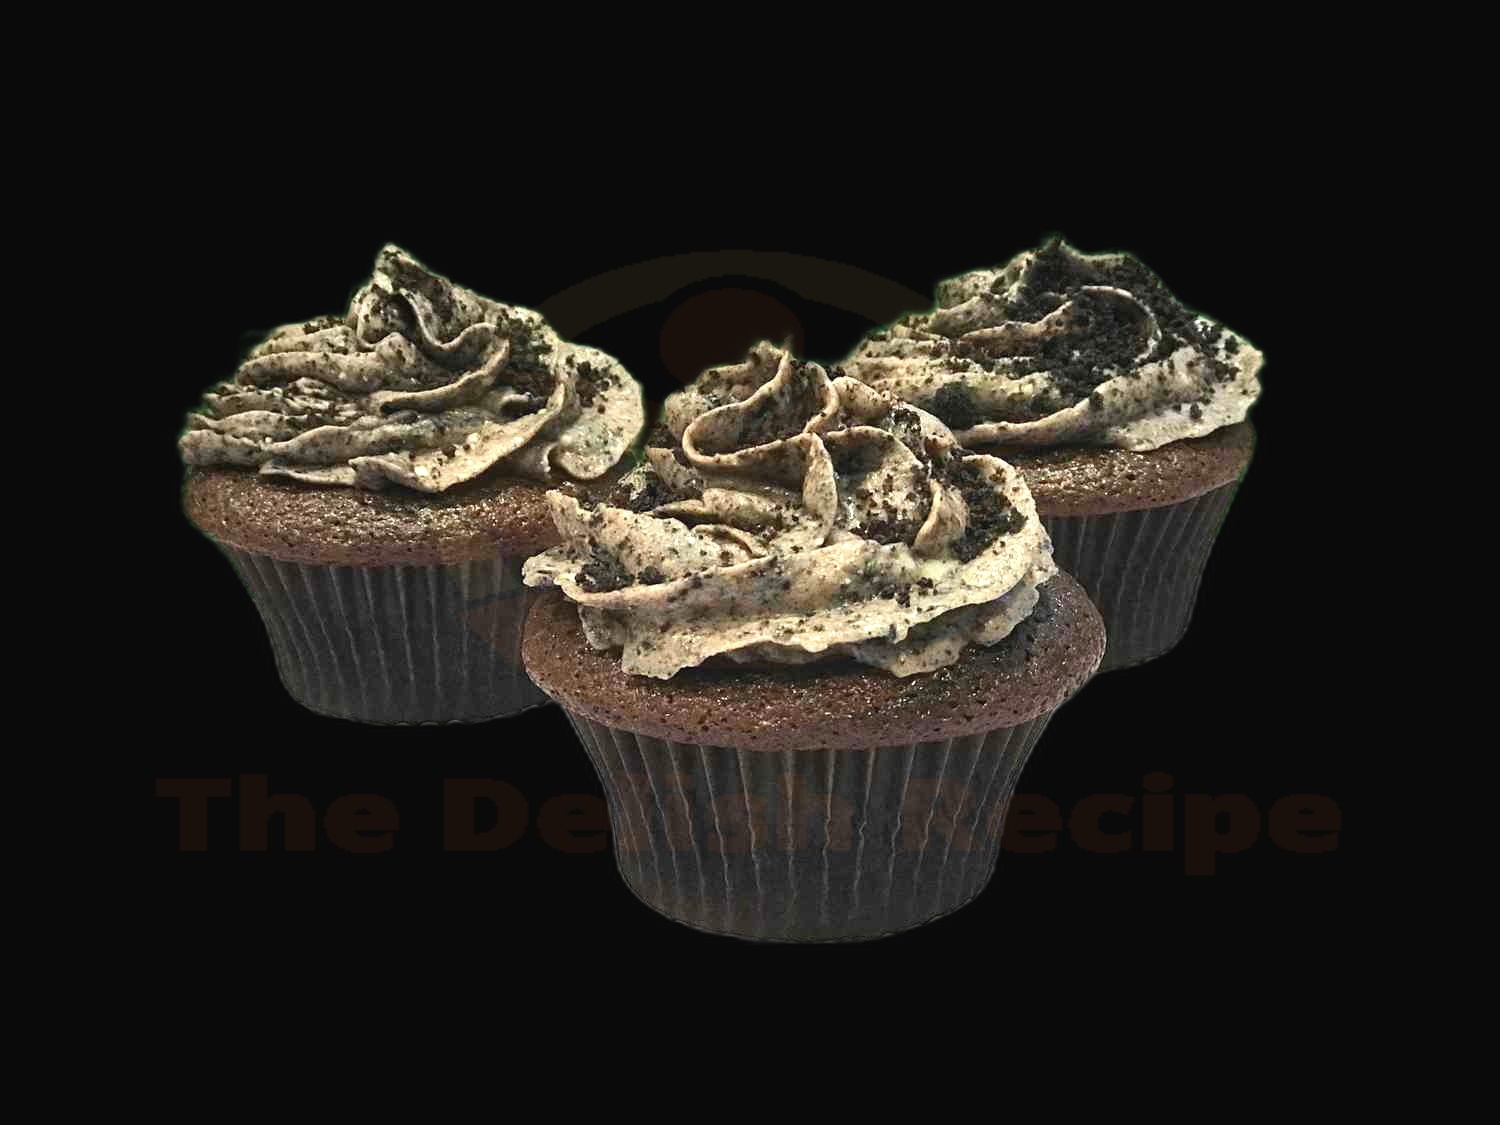 Chocolate Cupcakes with Cream Cheese-Oreo-Buttercream Frosting